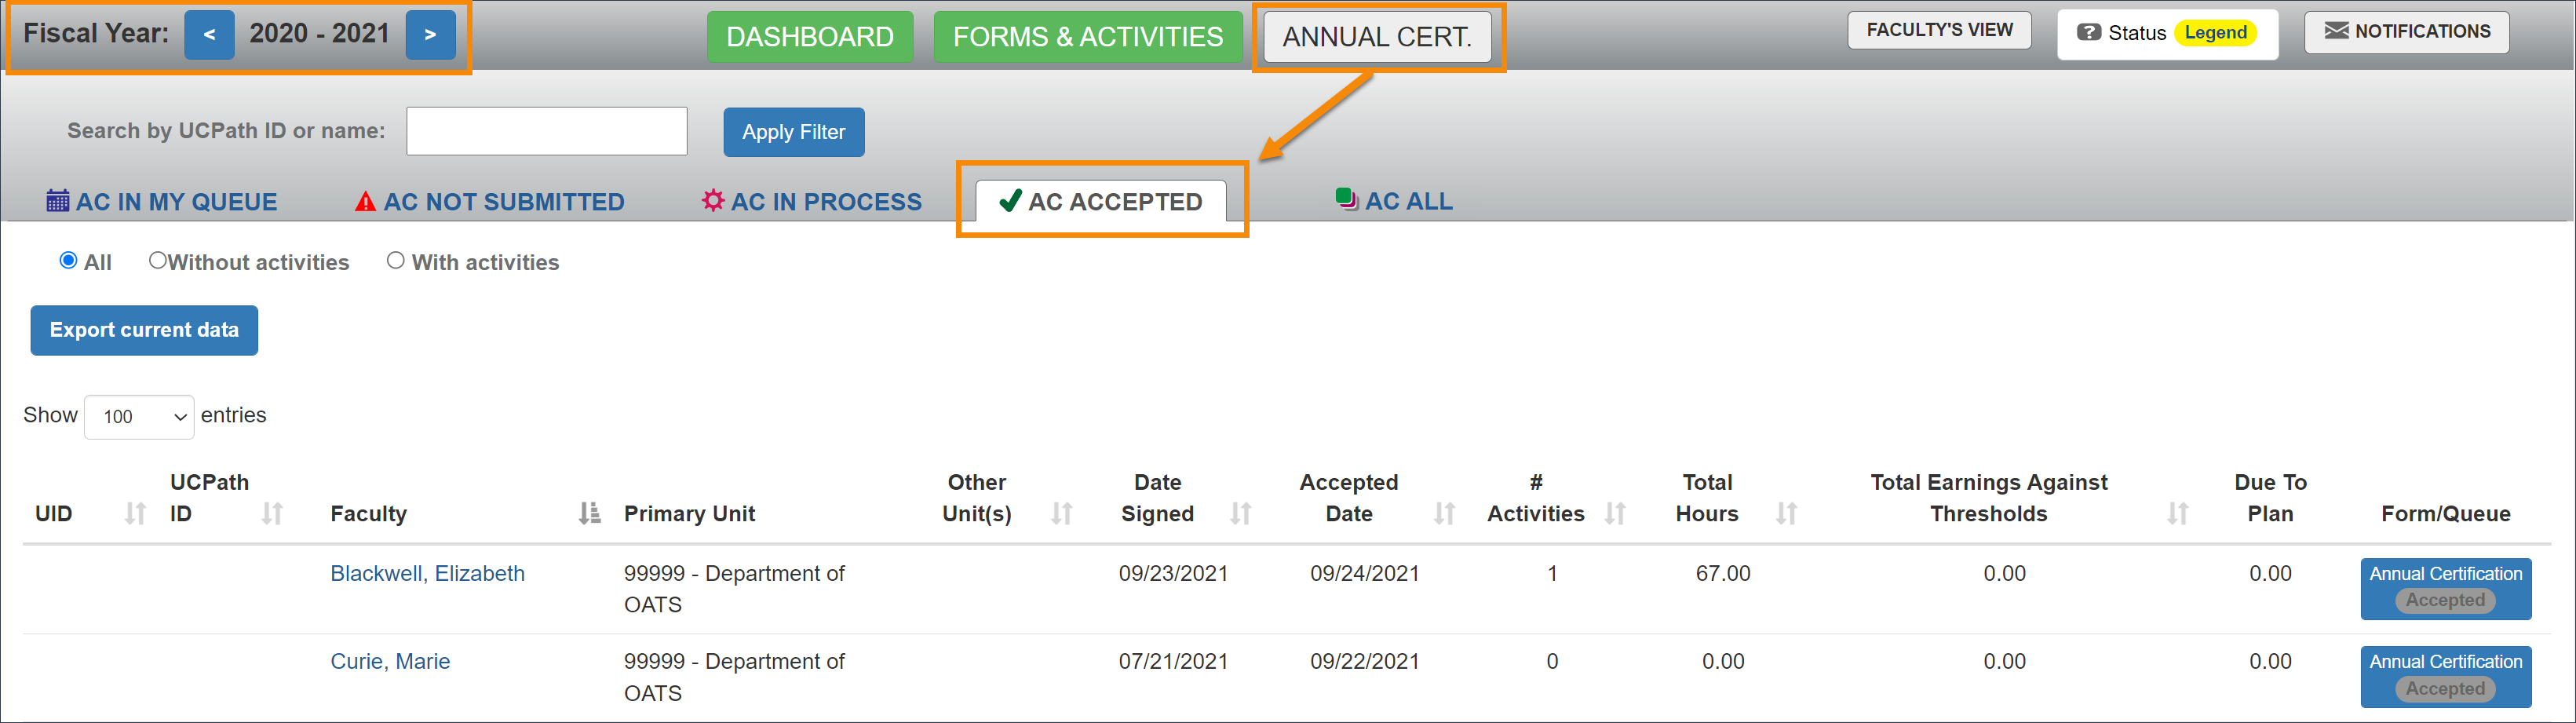 AC Accepted tab that shows annual certification reports that have received final acceptance